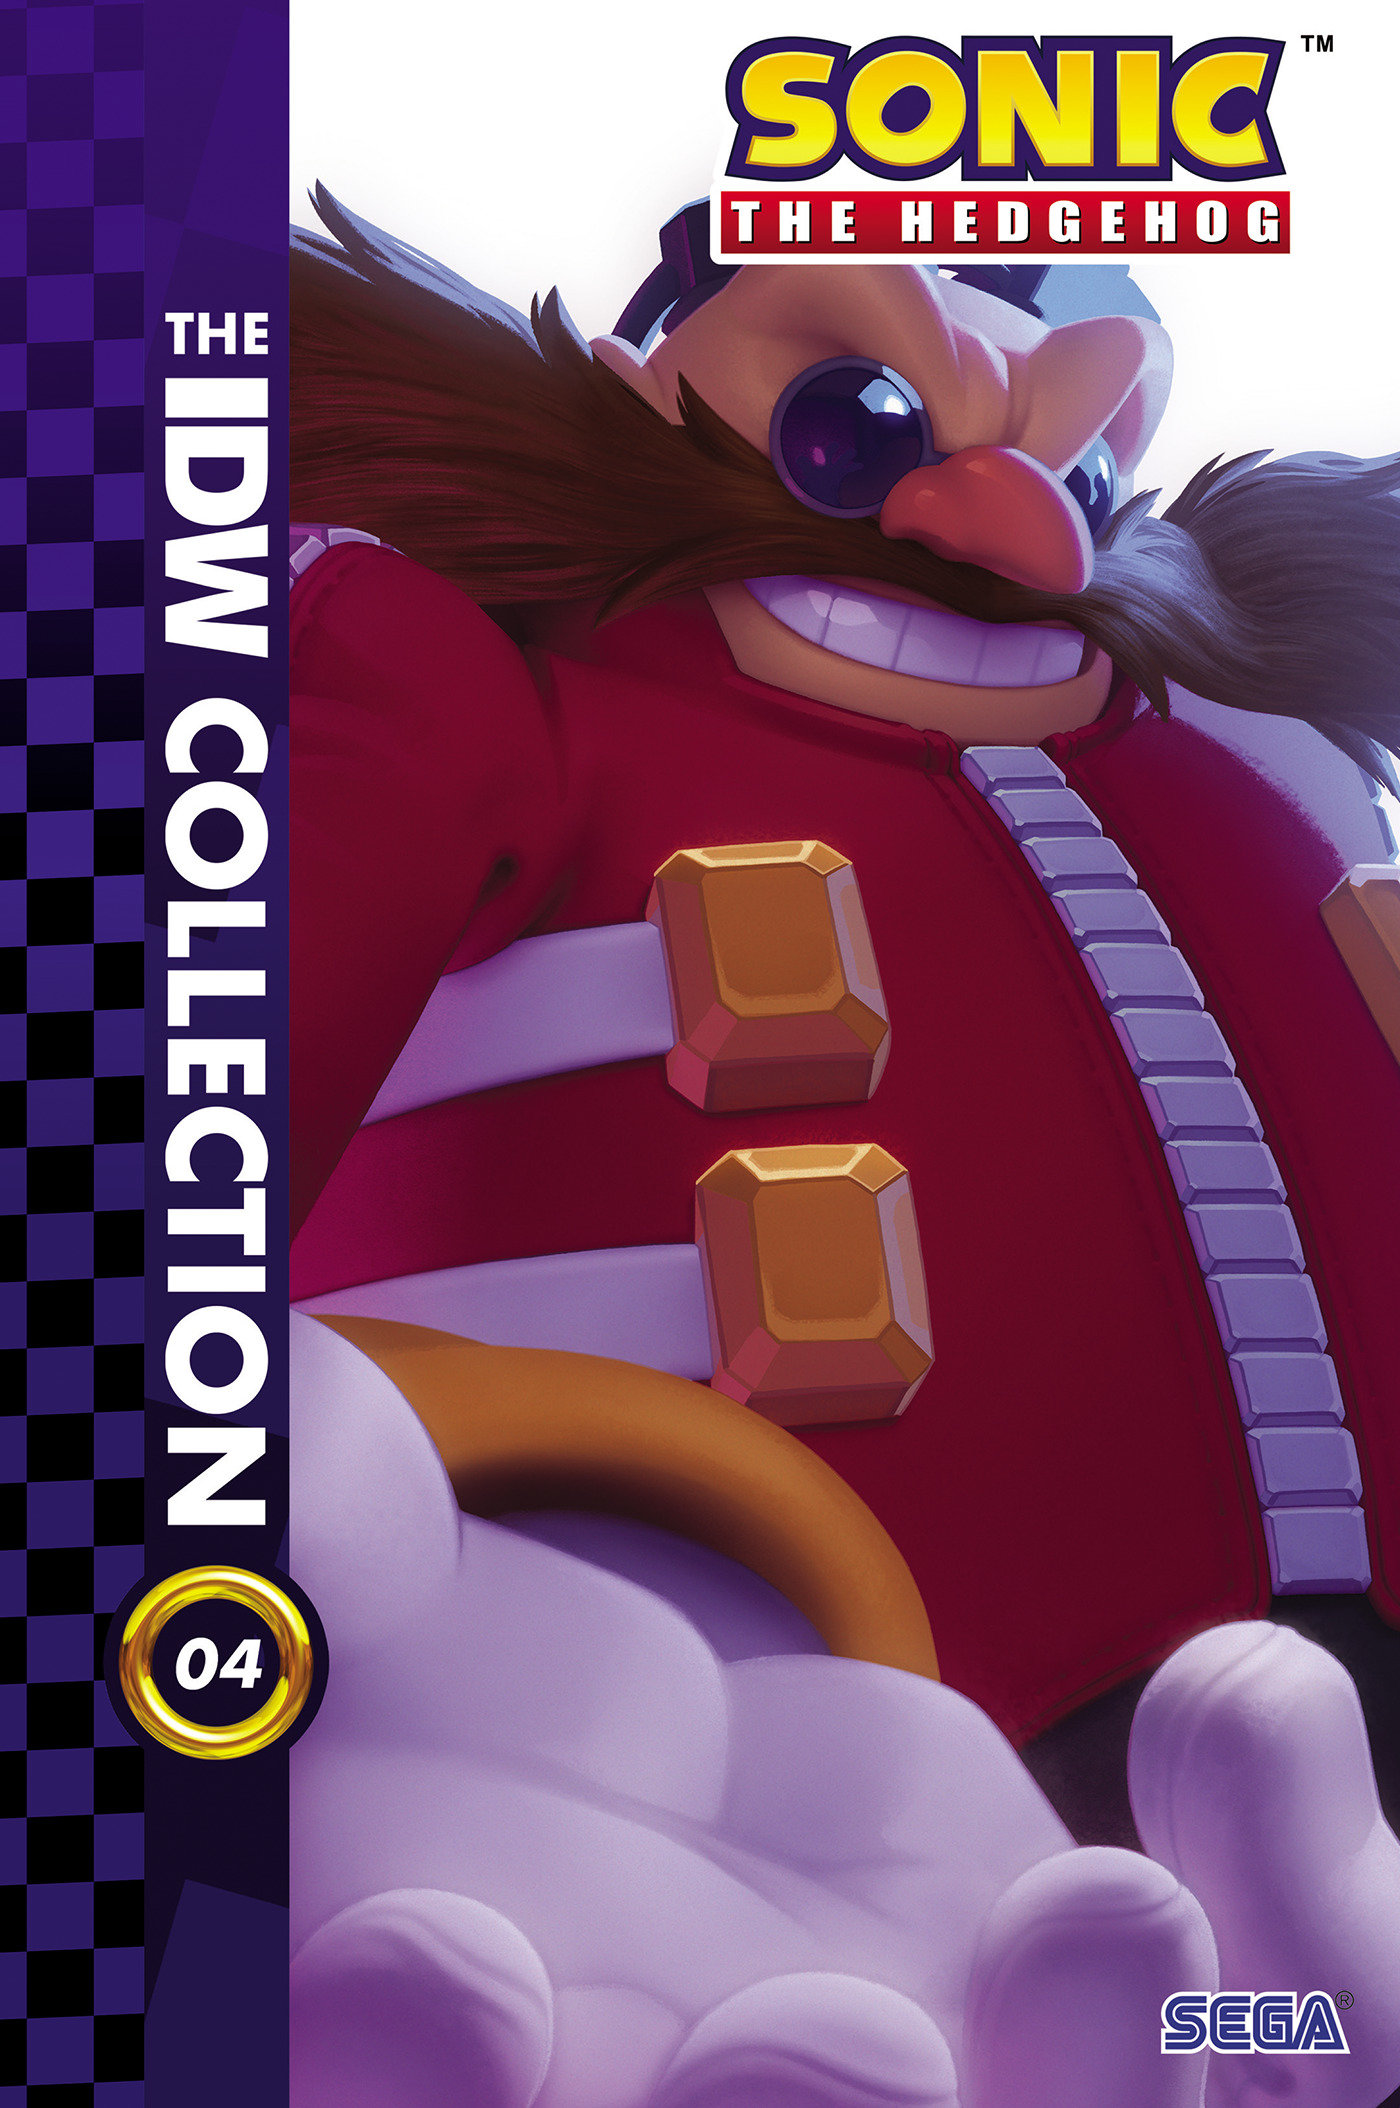 Sonic The Hedgehog Idw Collection Hardcover Volume 4